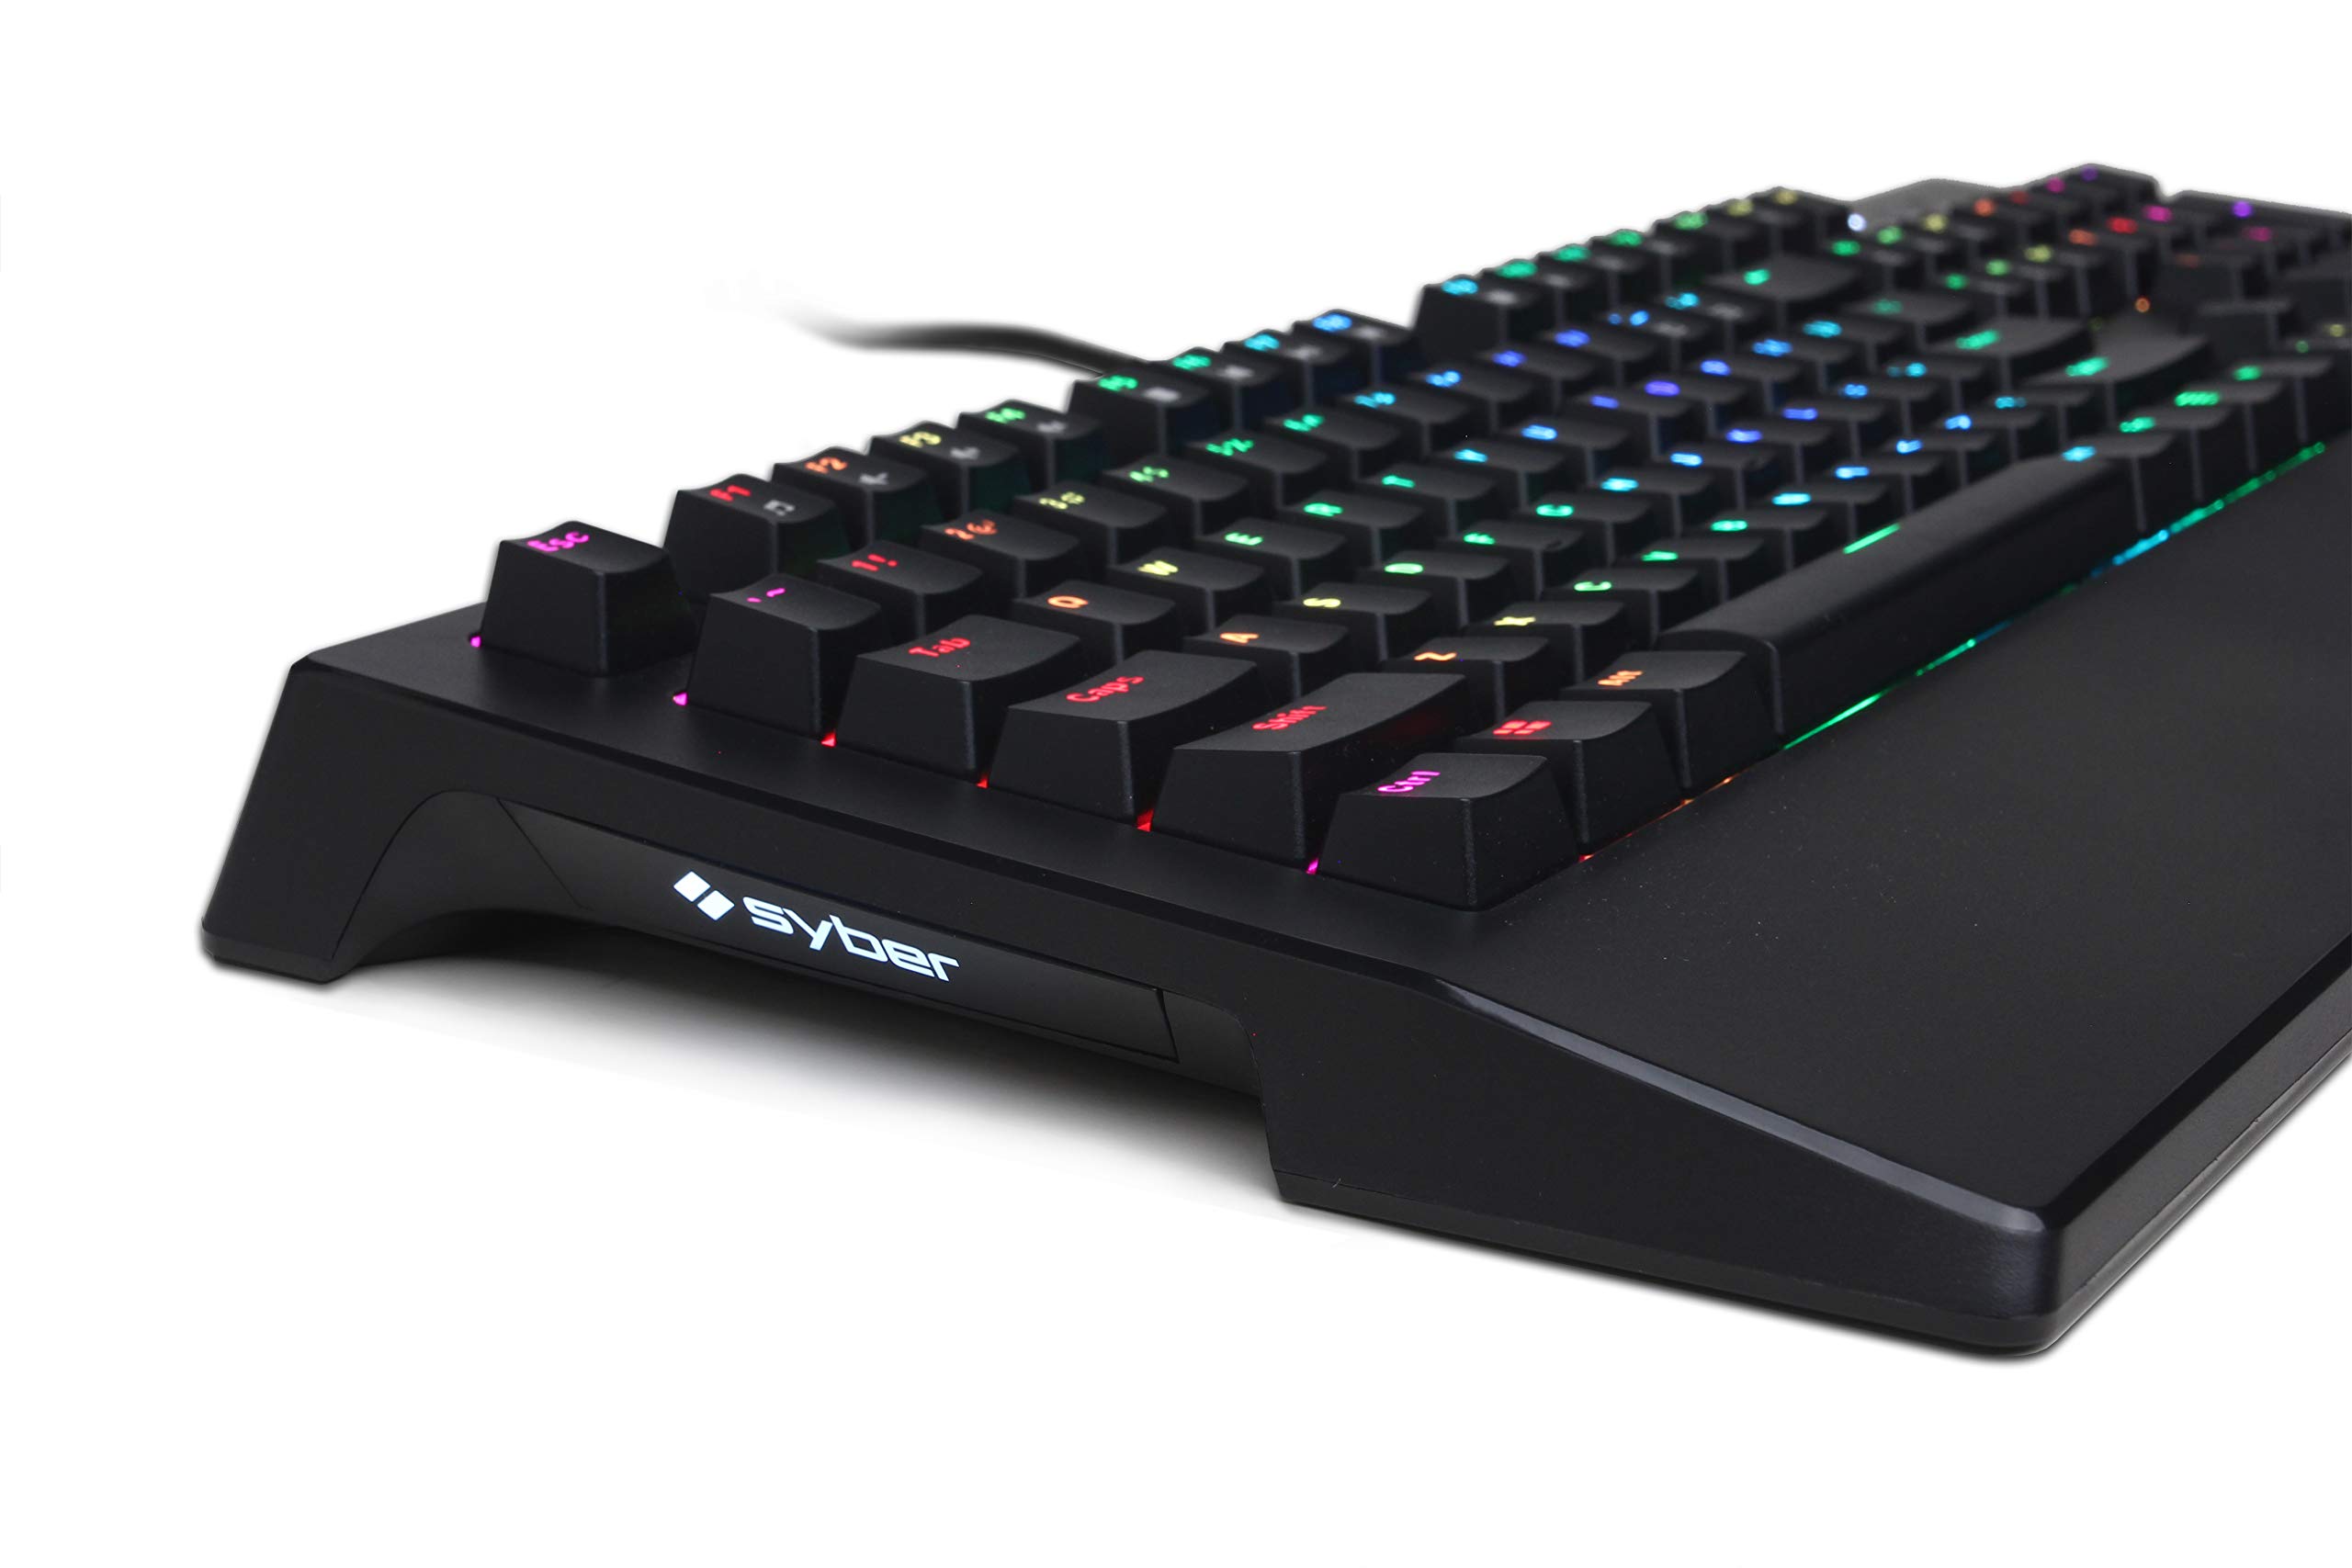 CyberpowerPC Syber SK100 RGB 104 Mechanical Gaming Keyboard (Individually Backlit Keys, Kontact ™ Blue Mechanical Switches, Programmable Macro Keys and Built in Wrist Support), Black